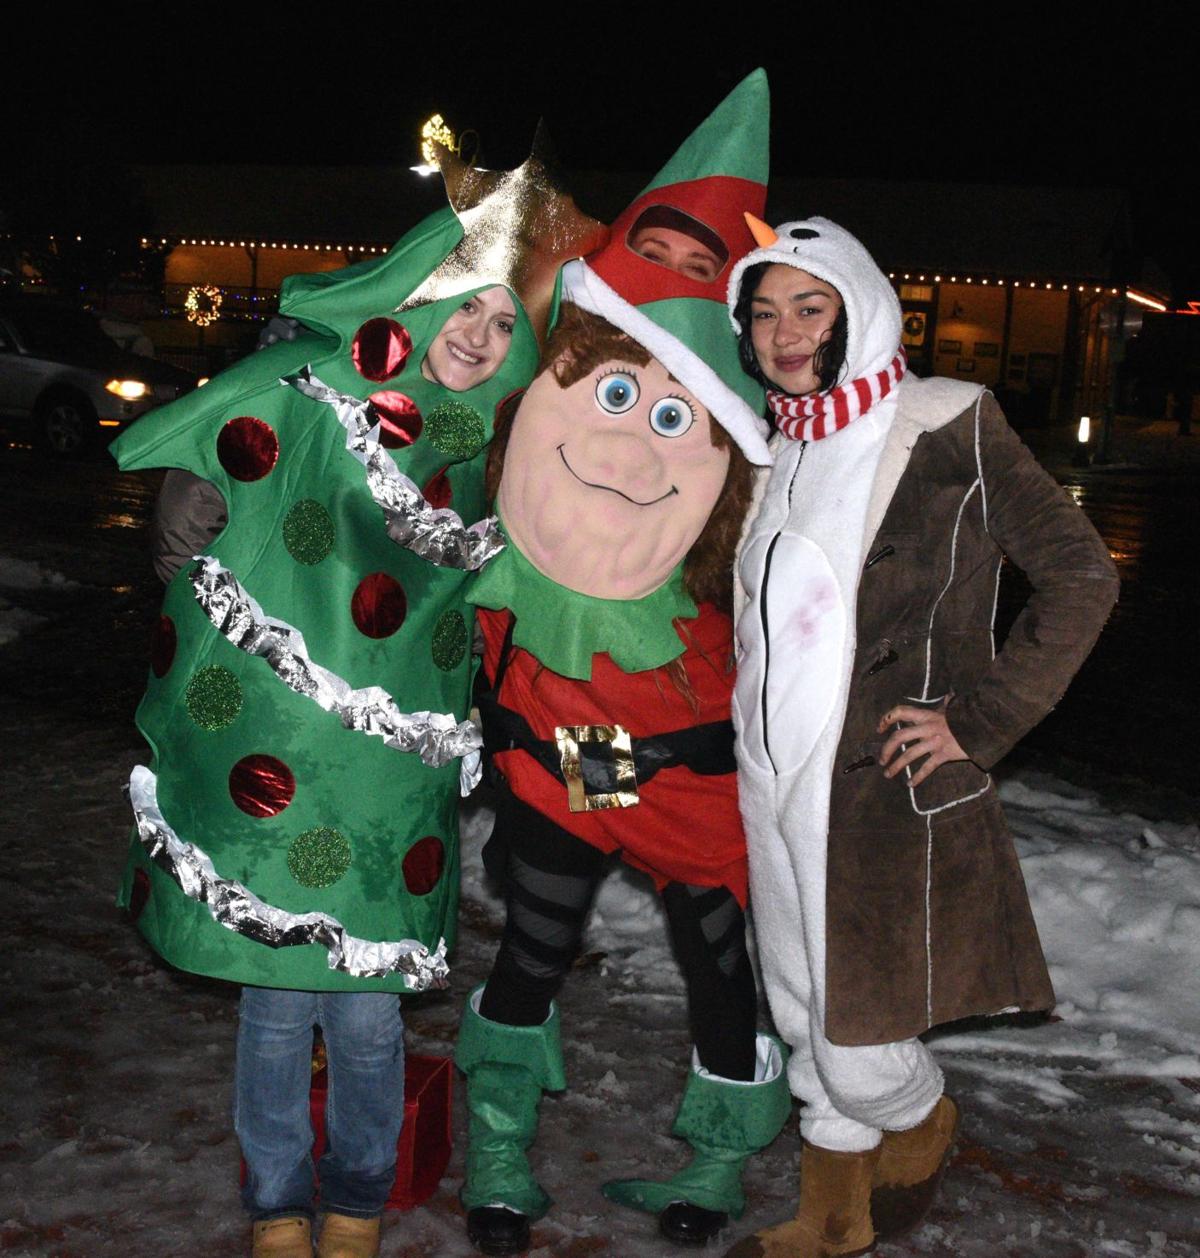 PHOTO GALLERY Snow, cold don't stop Ugly Sweater Wine Walk News